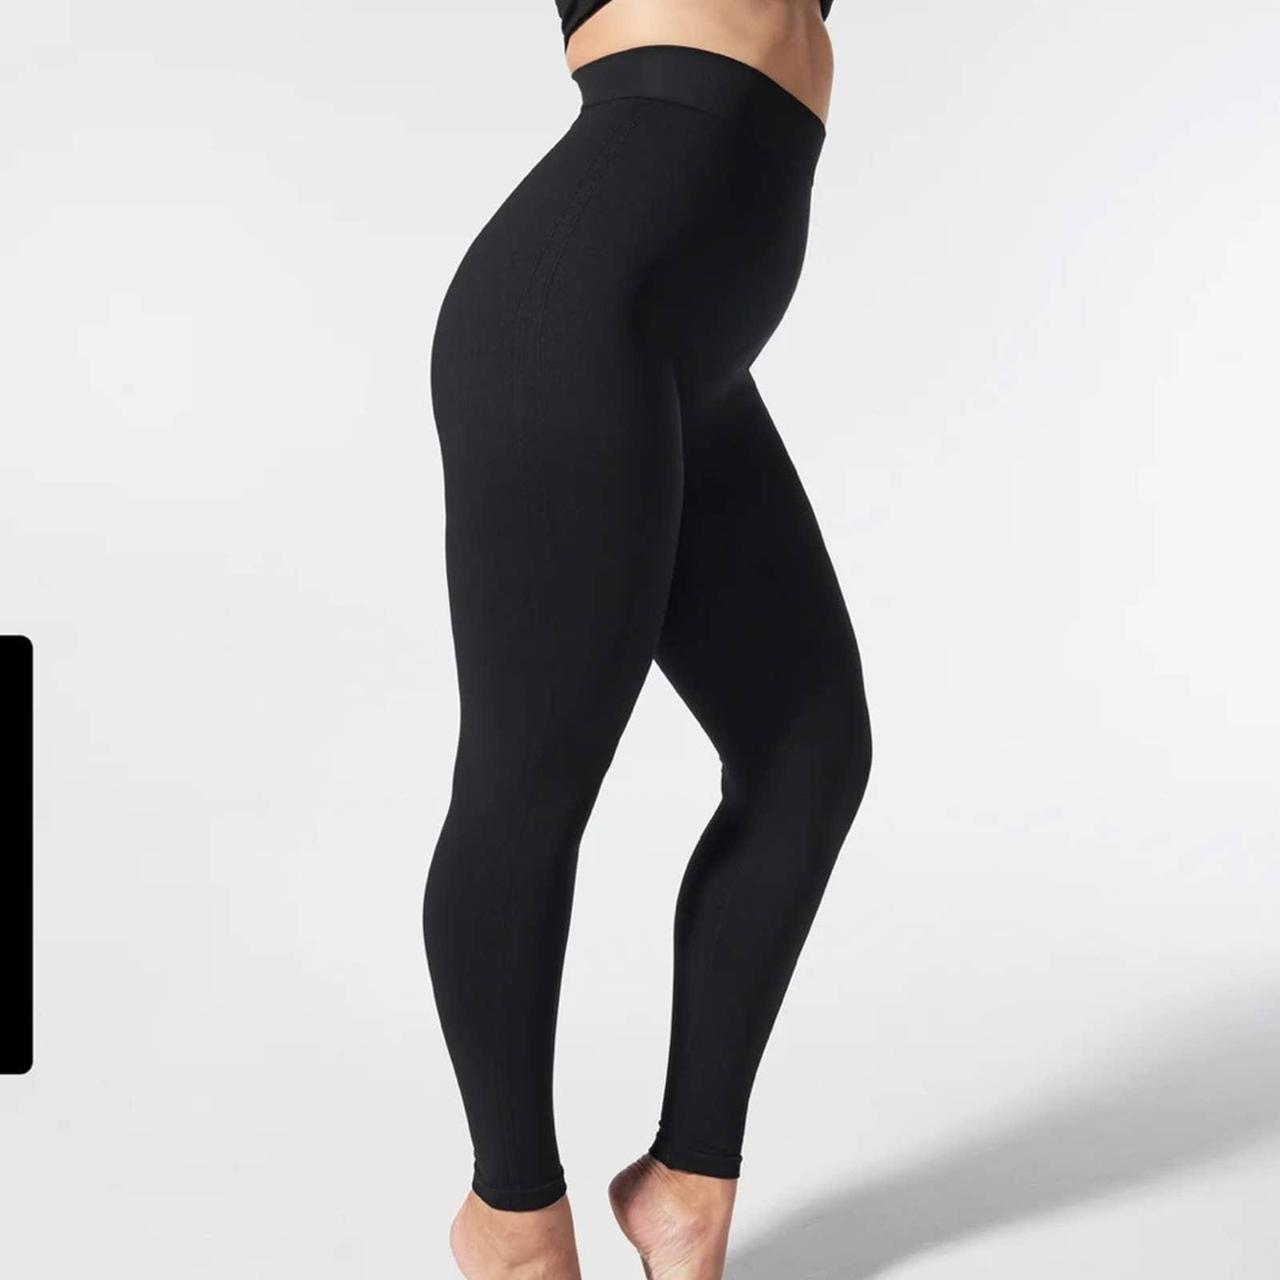 SPANX® Look At Me Now High-Waisted Leggings